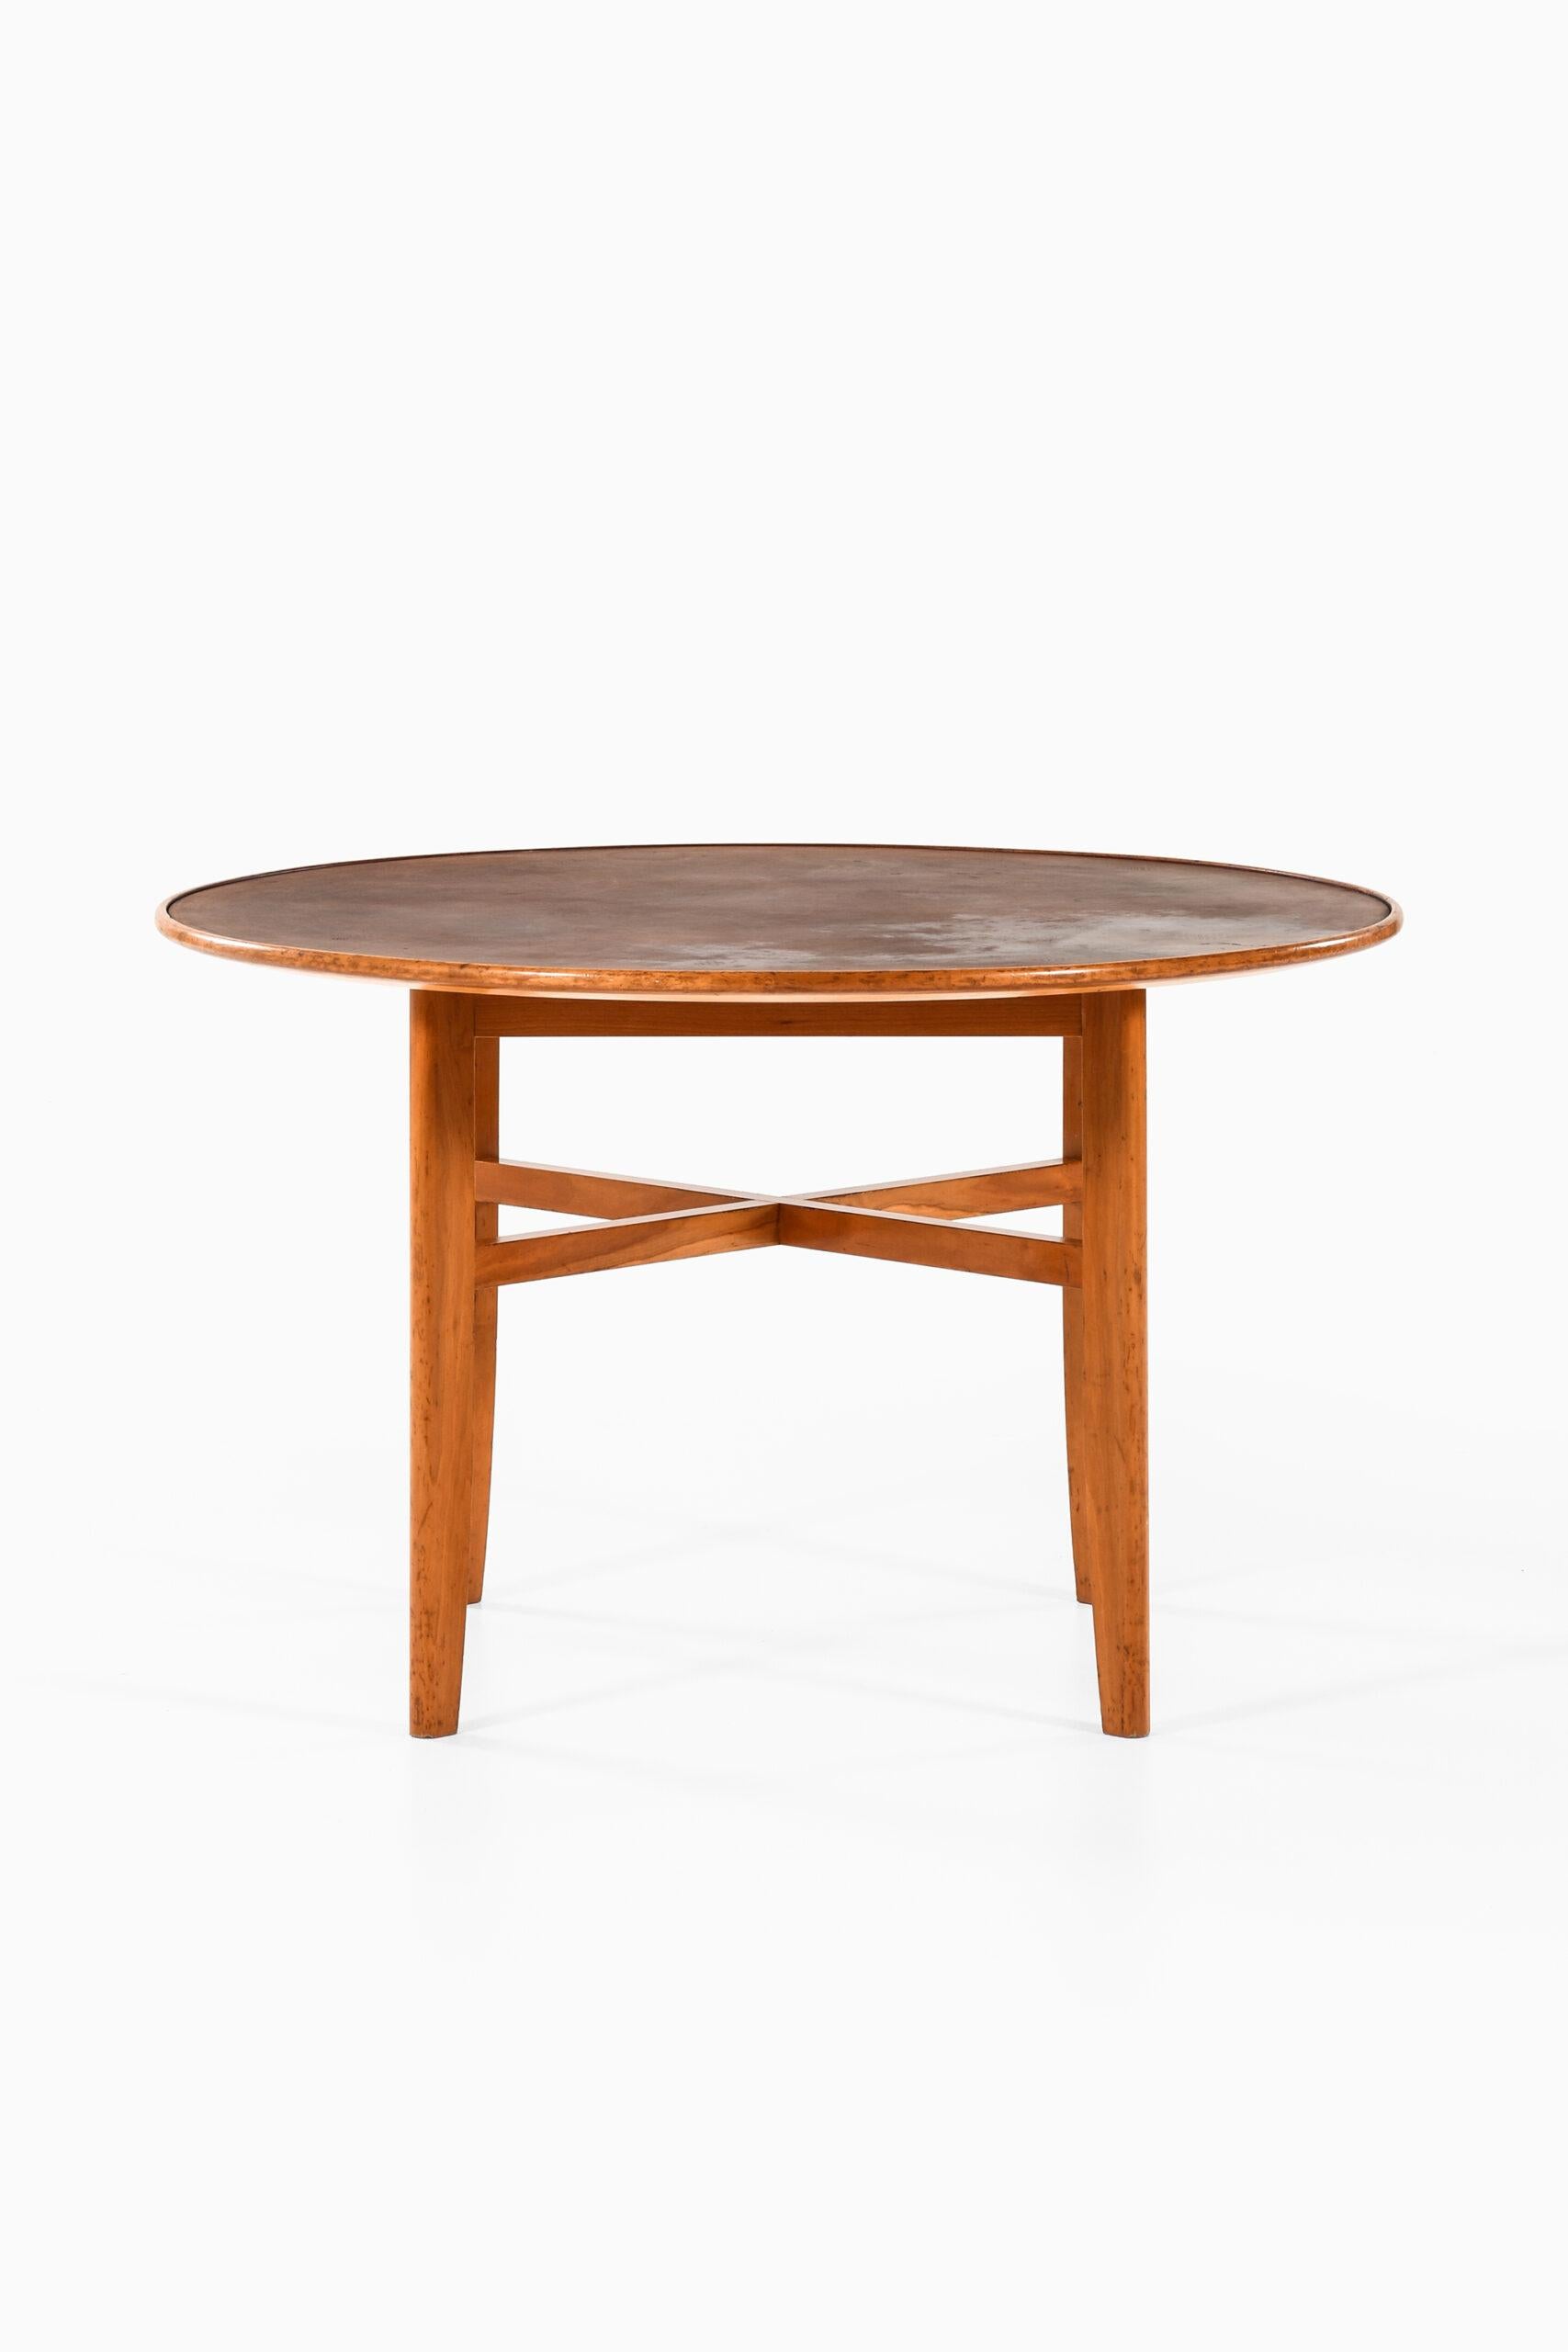 Swedish Elias Svedberg Dining Table Produced by Nordiska Kompaniet in Sweden For Sale